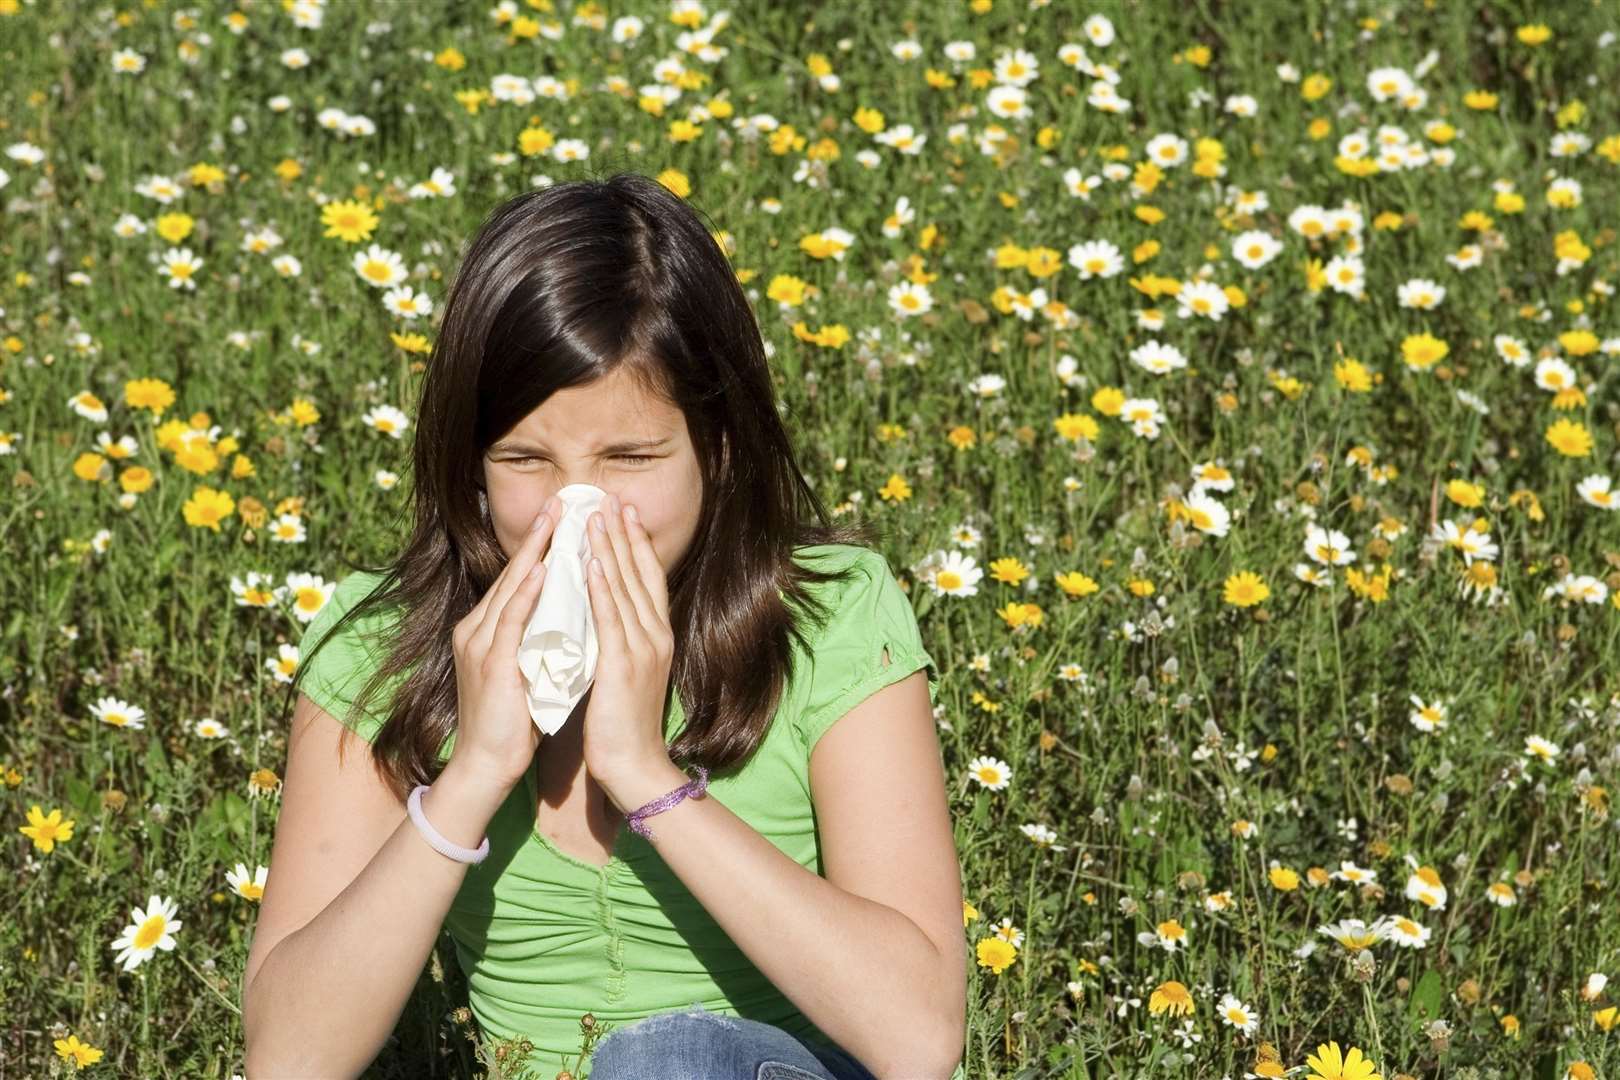 Dry, warm weather can make allergies worse. Image: iStock.